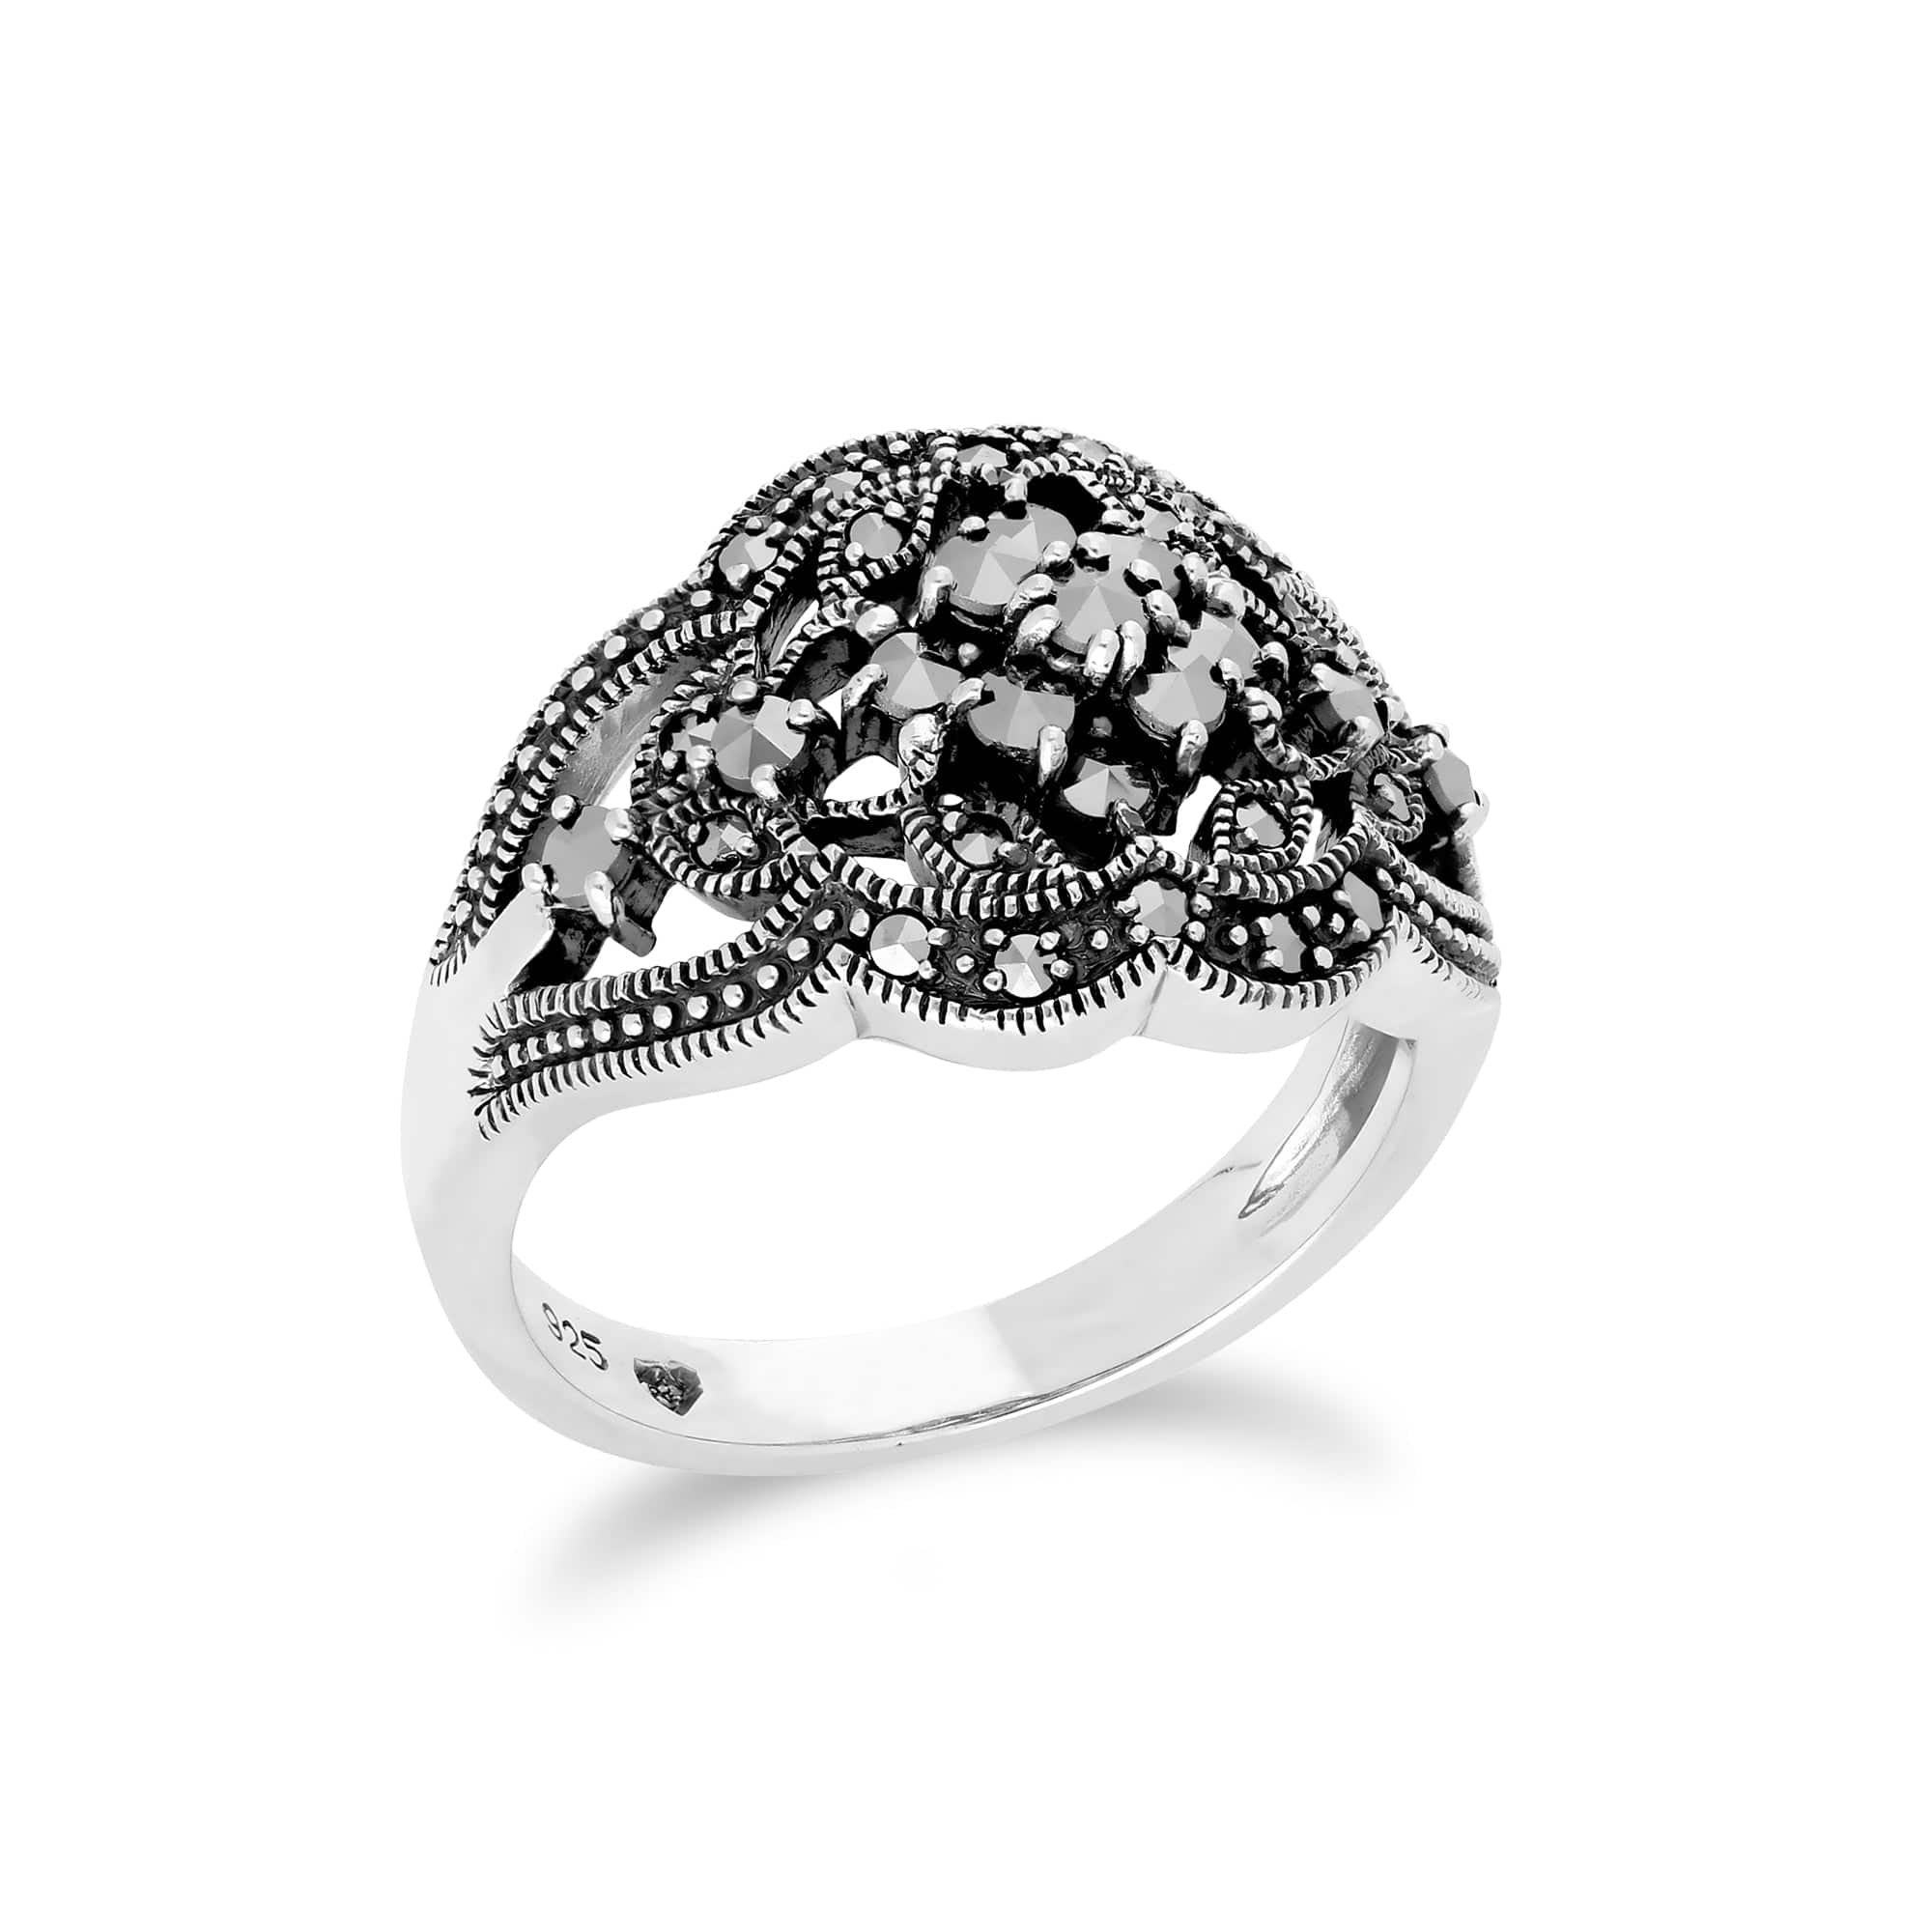 Art Nouveau Style Round Marcasite Cluster Ring in 925 Sterling Silver - Gemondo